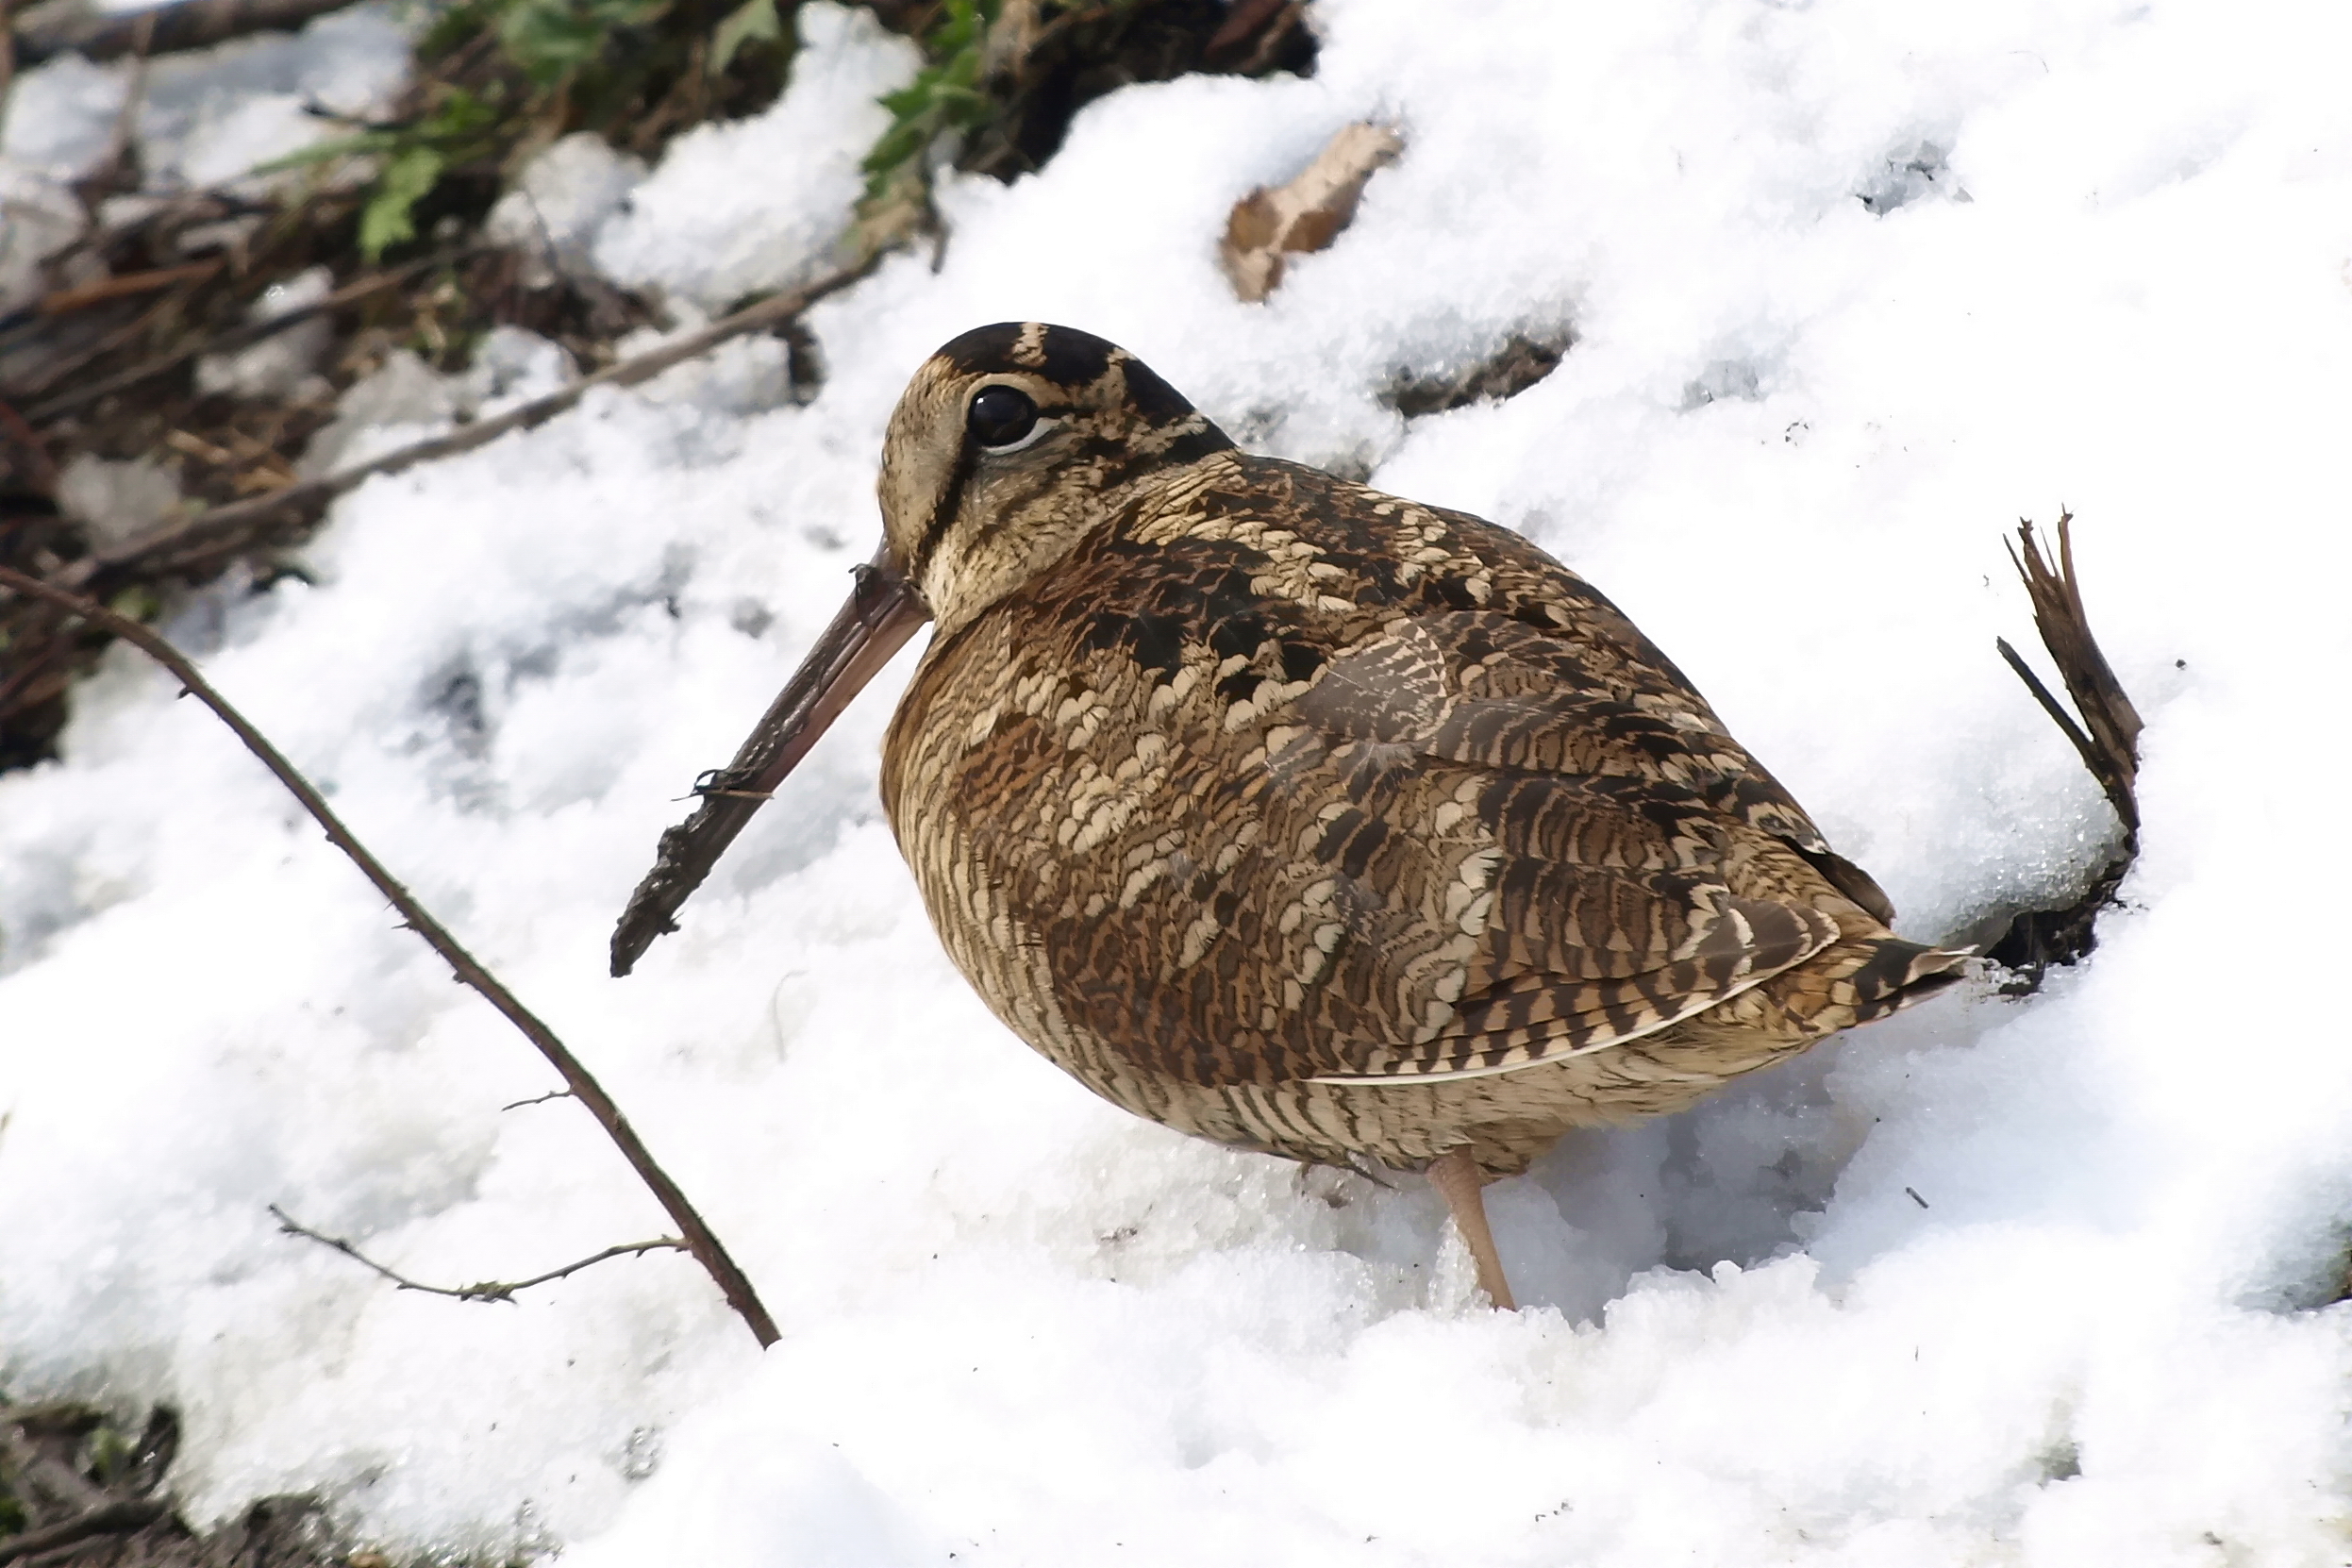 A woodcock standing on a snowy woodland floor